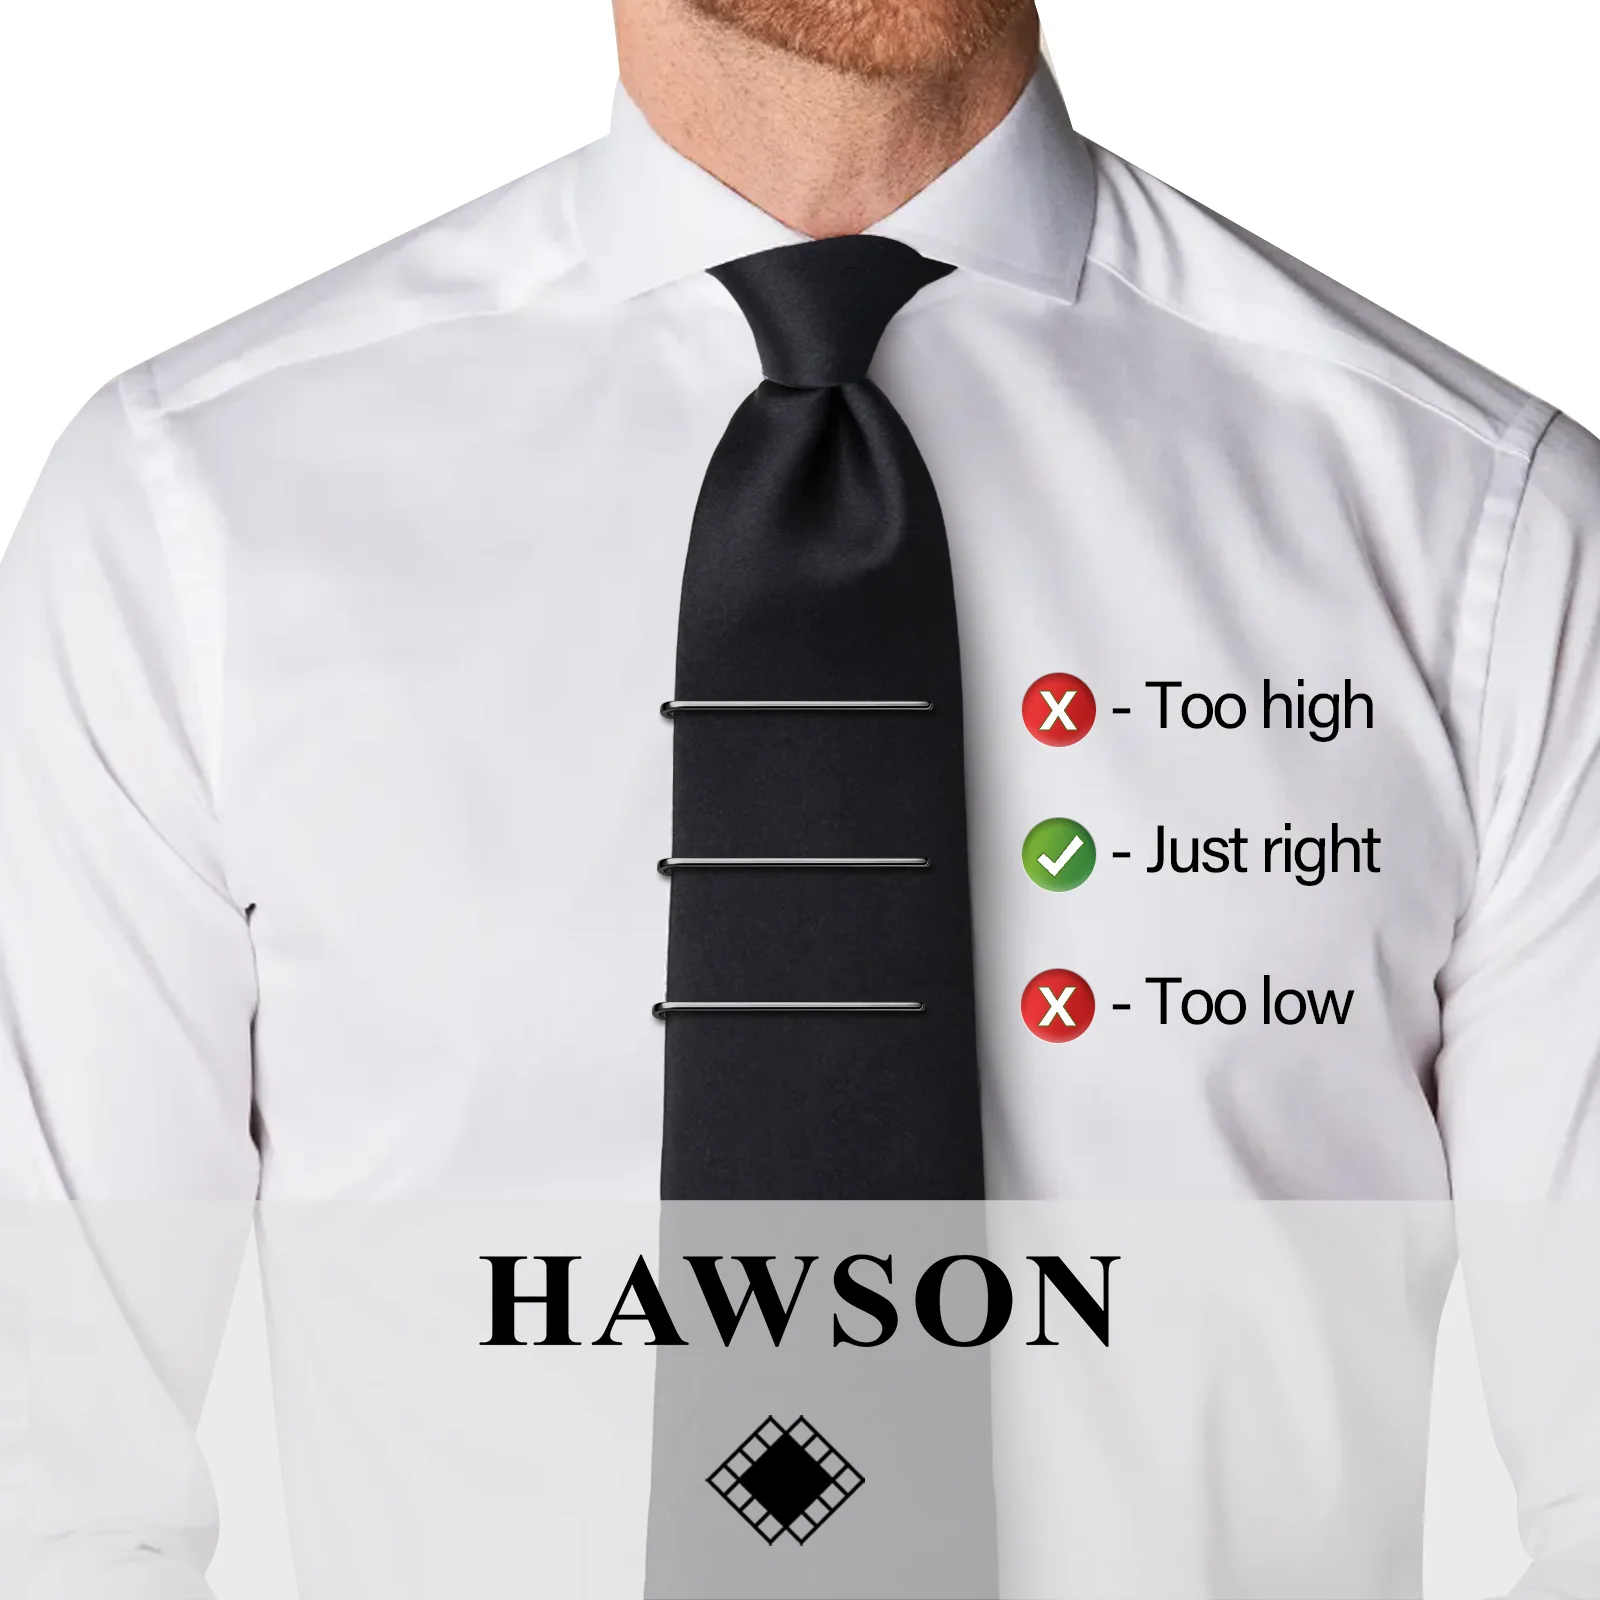 HAWSON Tie Clips for Men 4Pcs Super Skinny Tie Bar Set,Gift Box Packed,Suitable for Wedding Anniversary Business and Daily Life.